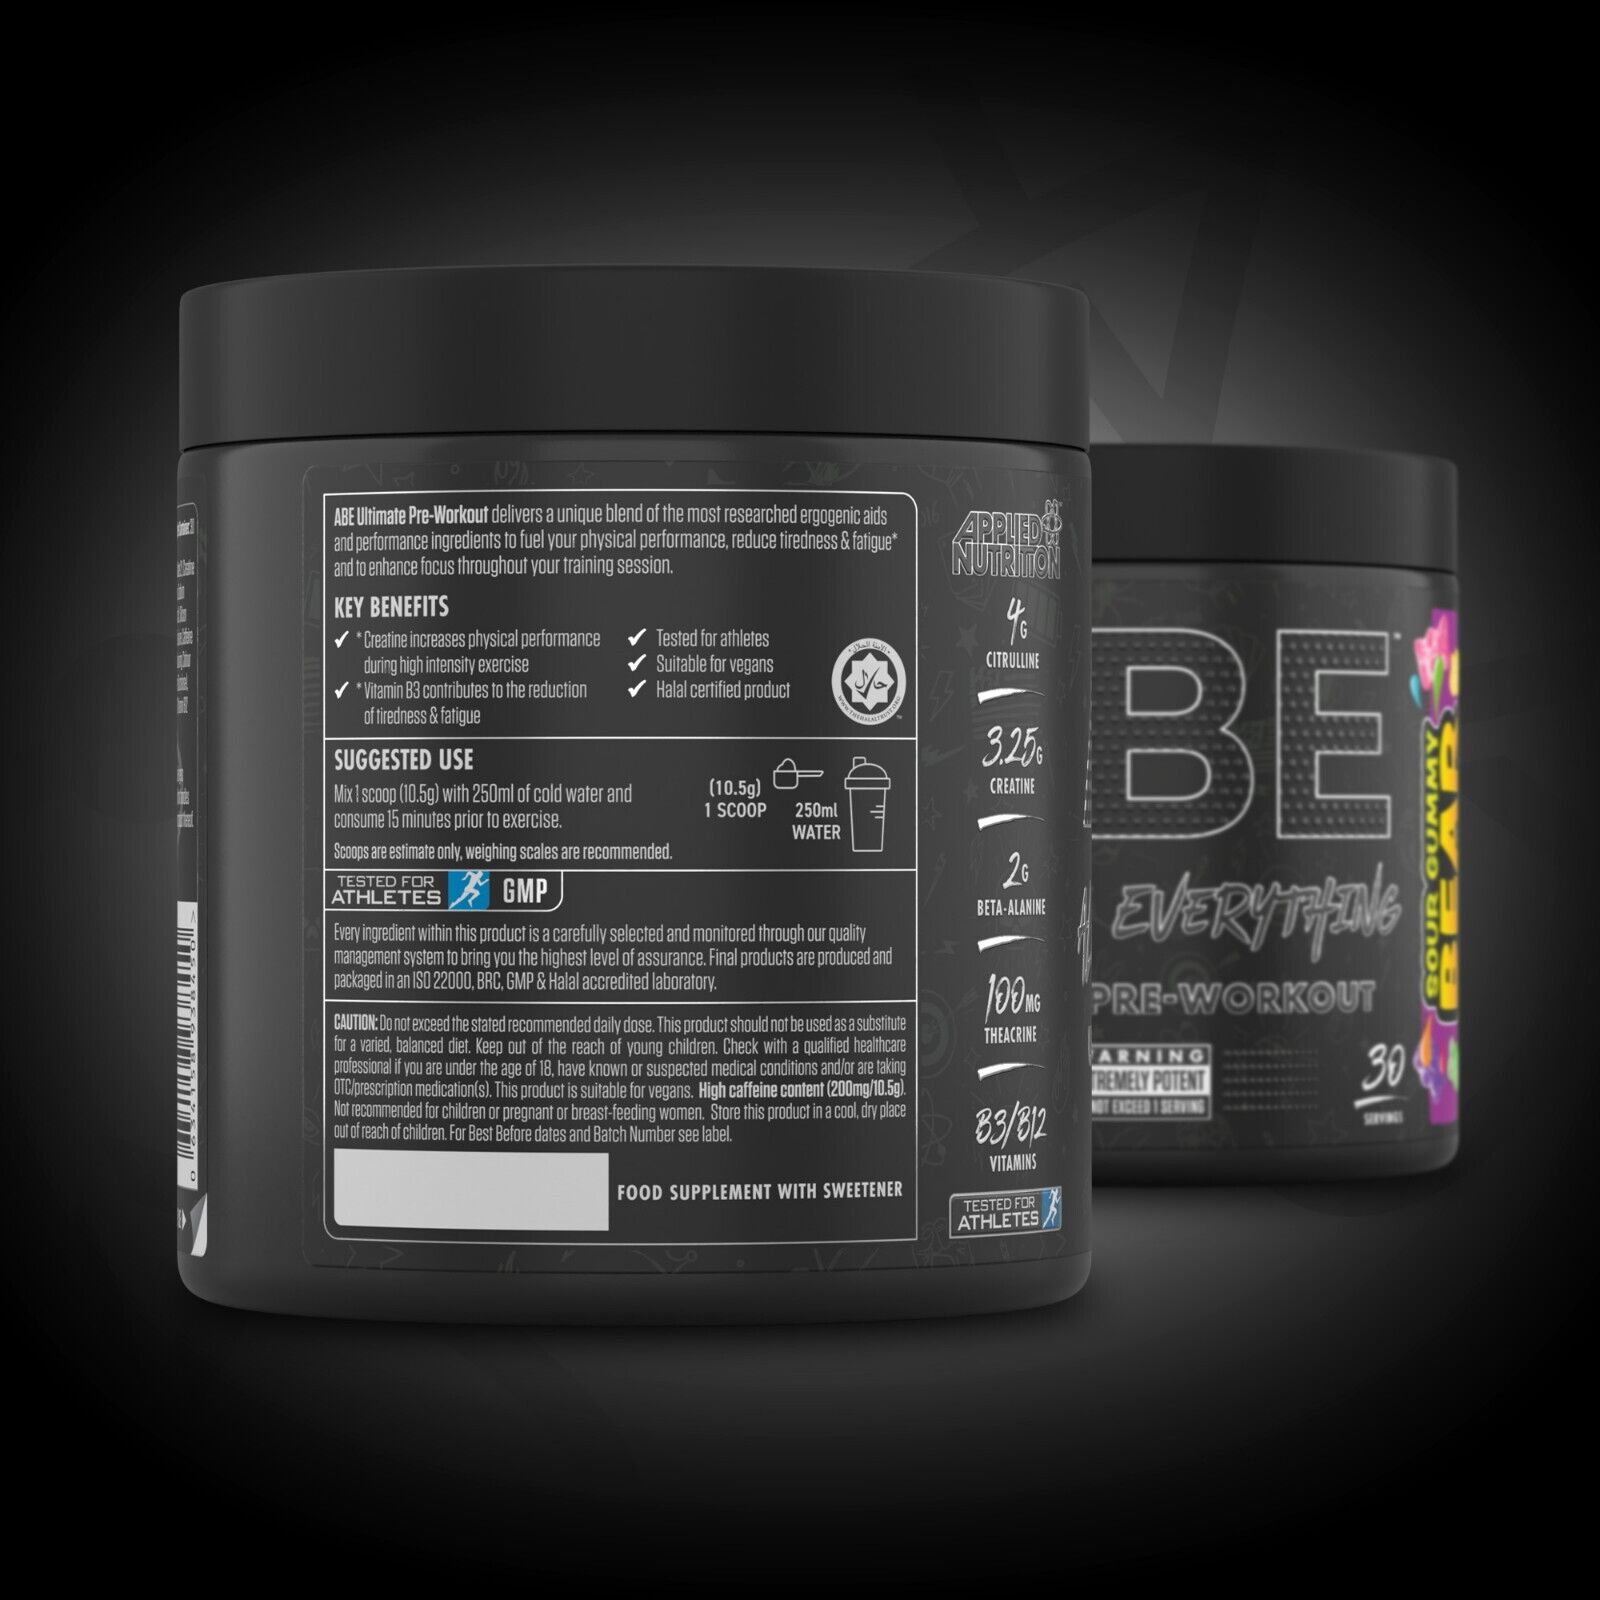 Applied Nutrition ABE Pre Workout Powder with Creatine